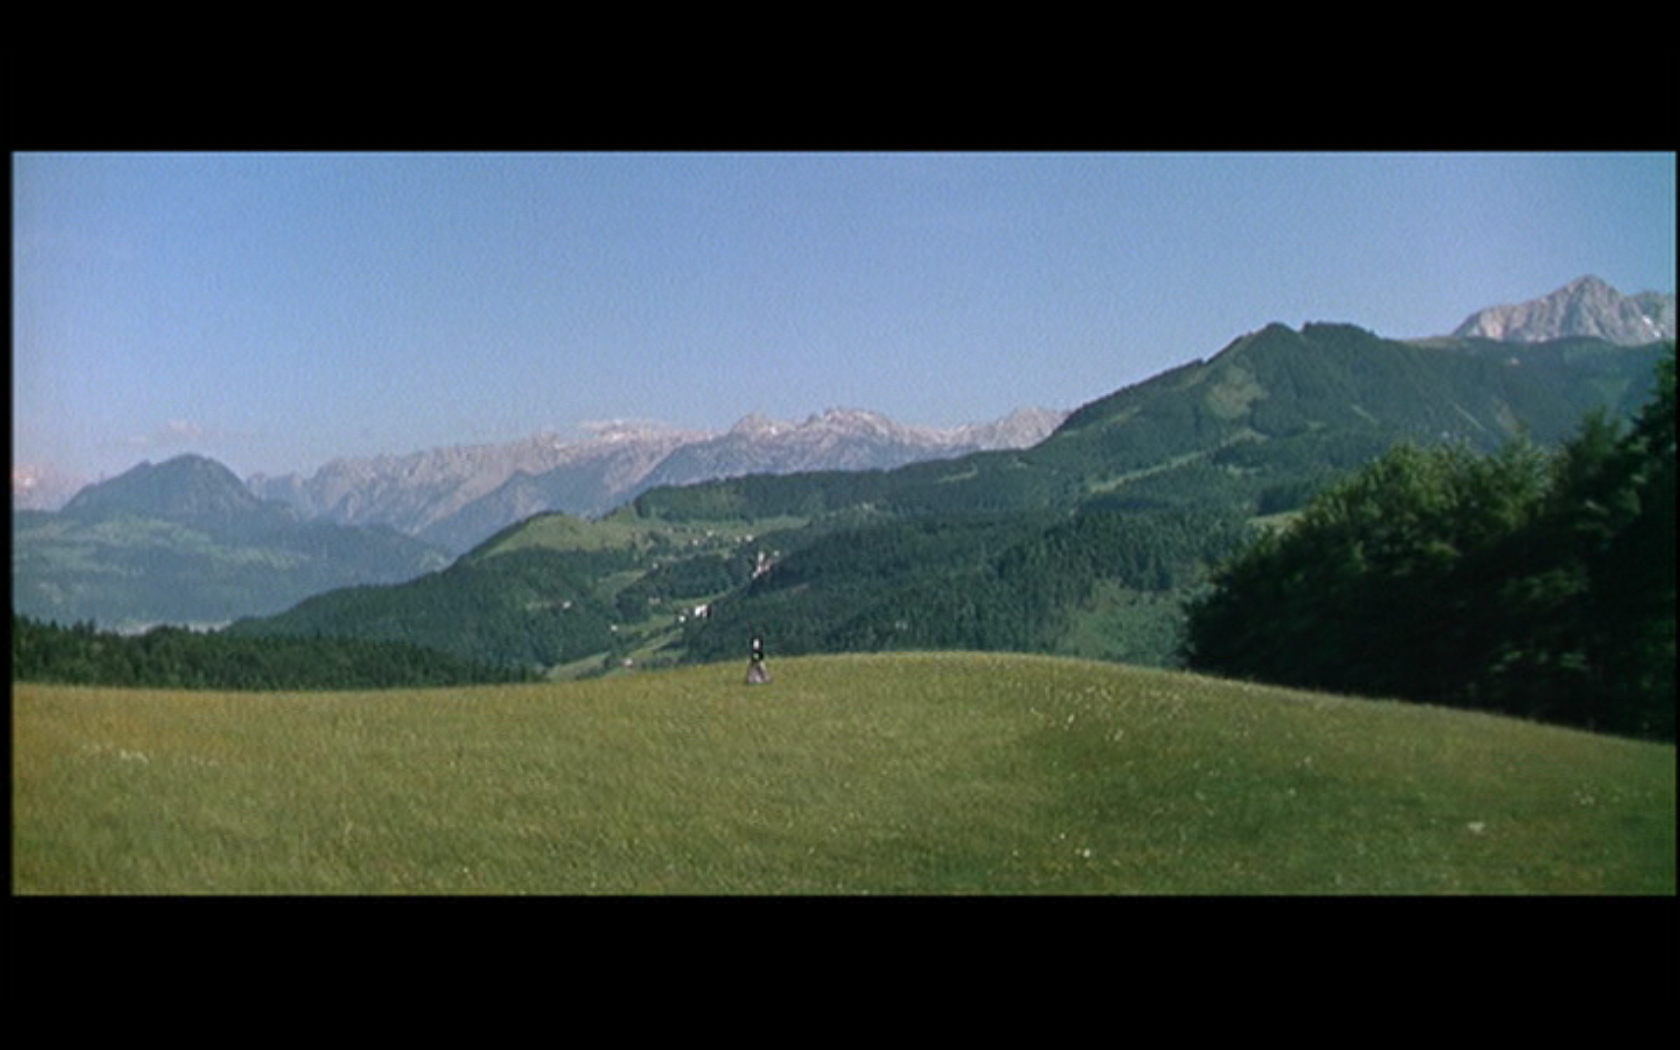 Helicopter shot from The SOUND OF MUSIC